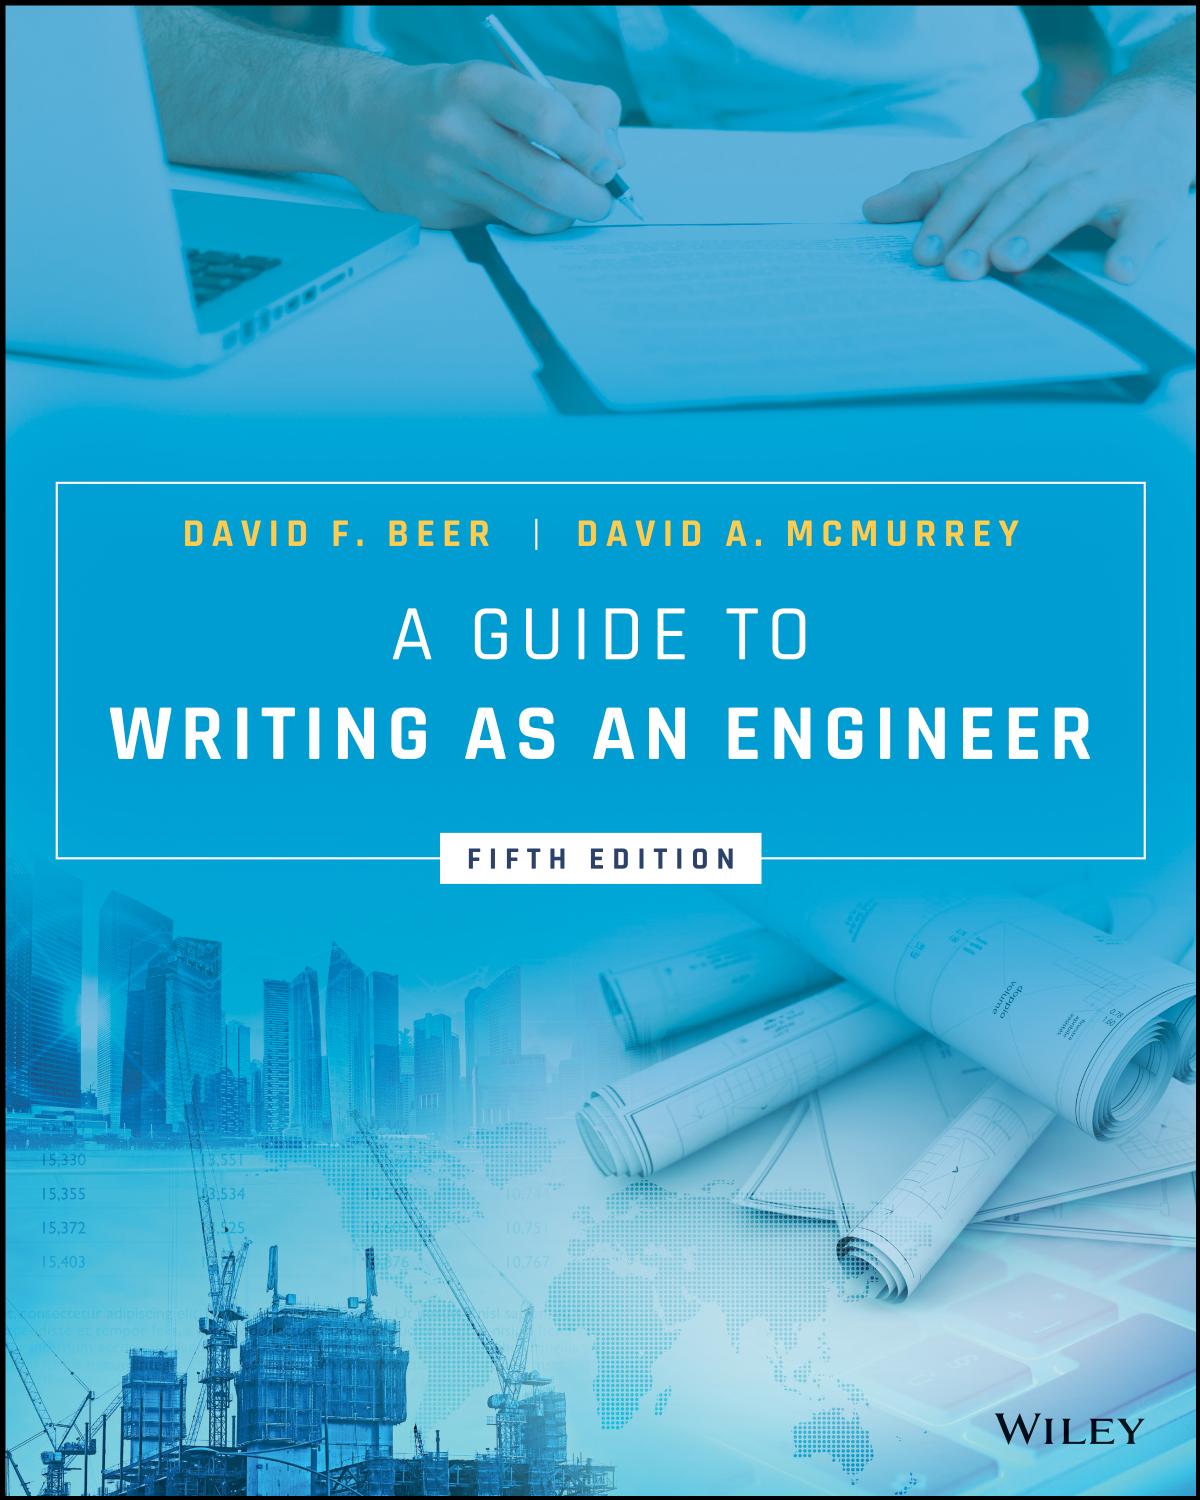 A Guide to Writing as an Engineer, 5th Edition by David F. Beer, David A. McMurrey